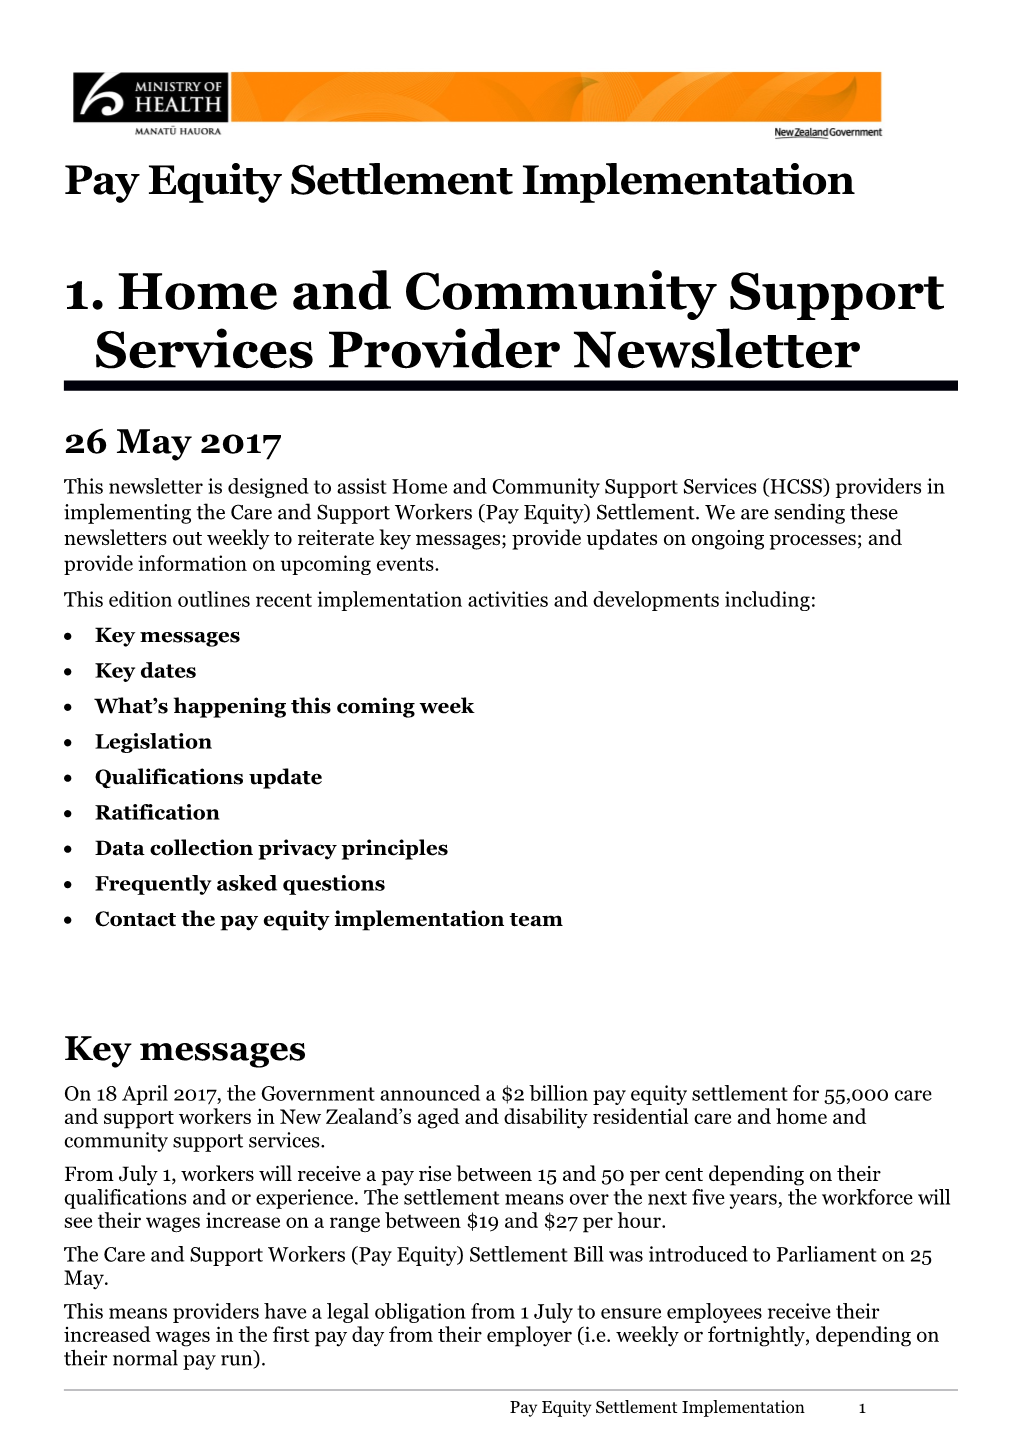 Home and Community Support Services Provider Newsletter: 26 May 2017